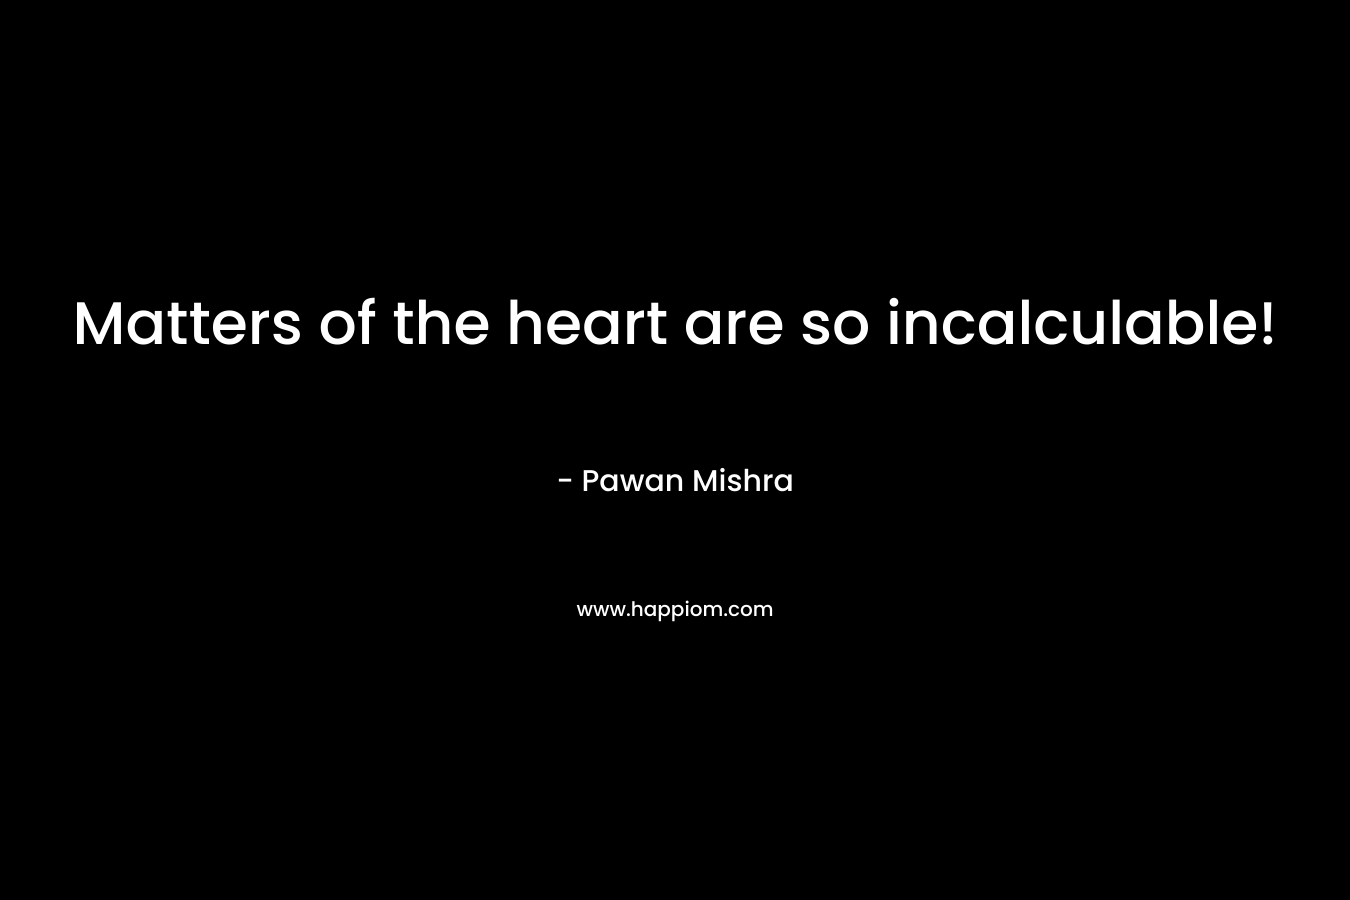 Matters of the heart are so incalculable!